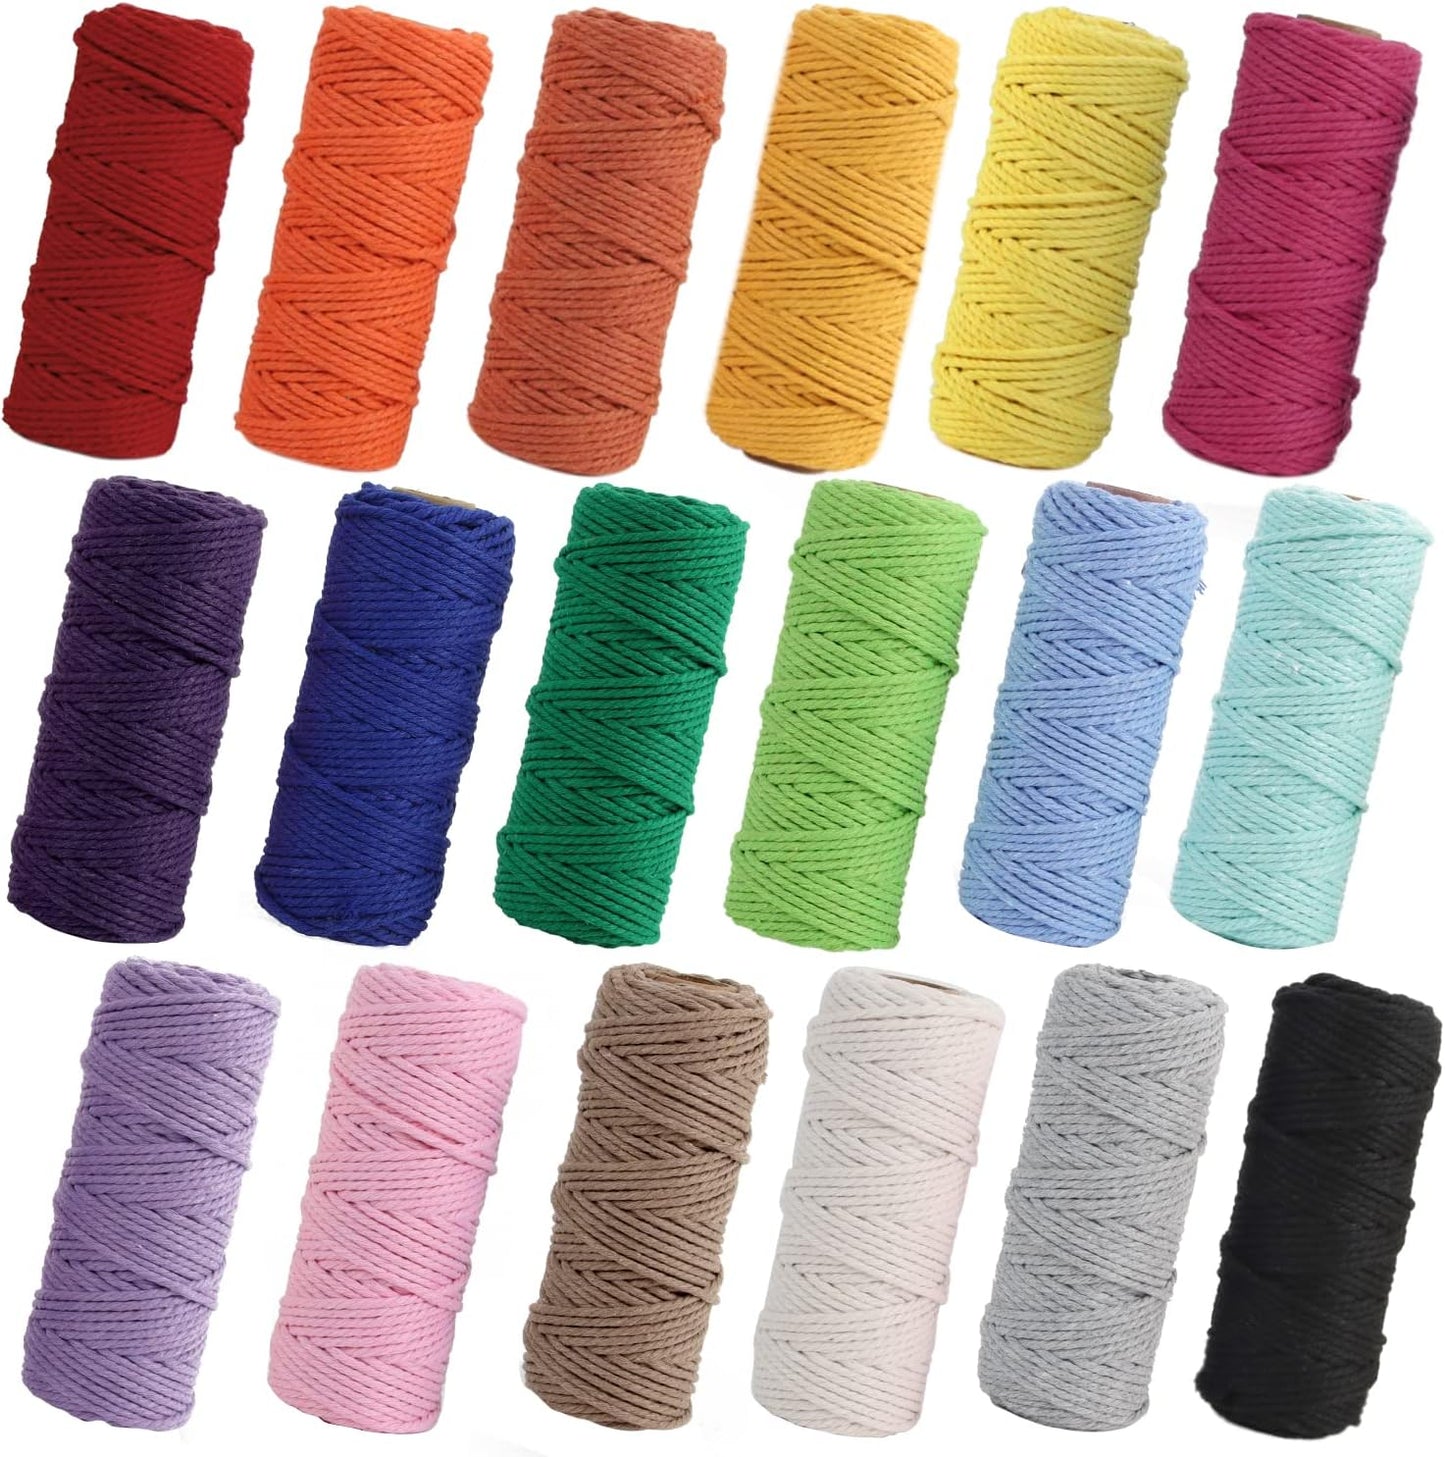 Macrame Cord 3Mm X 594 Yards, 18 Rolls Natural Colored Macrame Cotton Cord Rope Kit Color Variety Macrame Jute Twine String 4 Strand Twisted for Wall Hanger Plant Hanging DIY Knitting Macrame Supplies